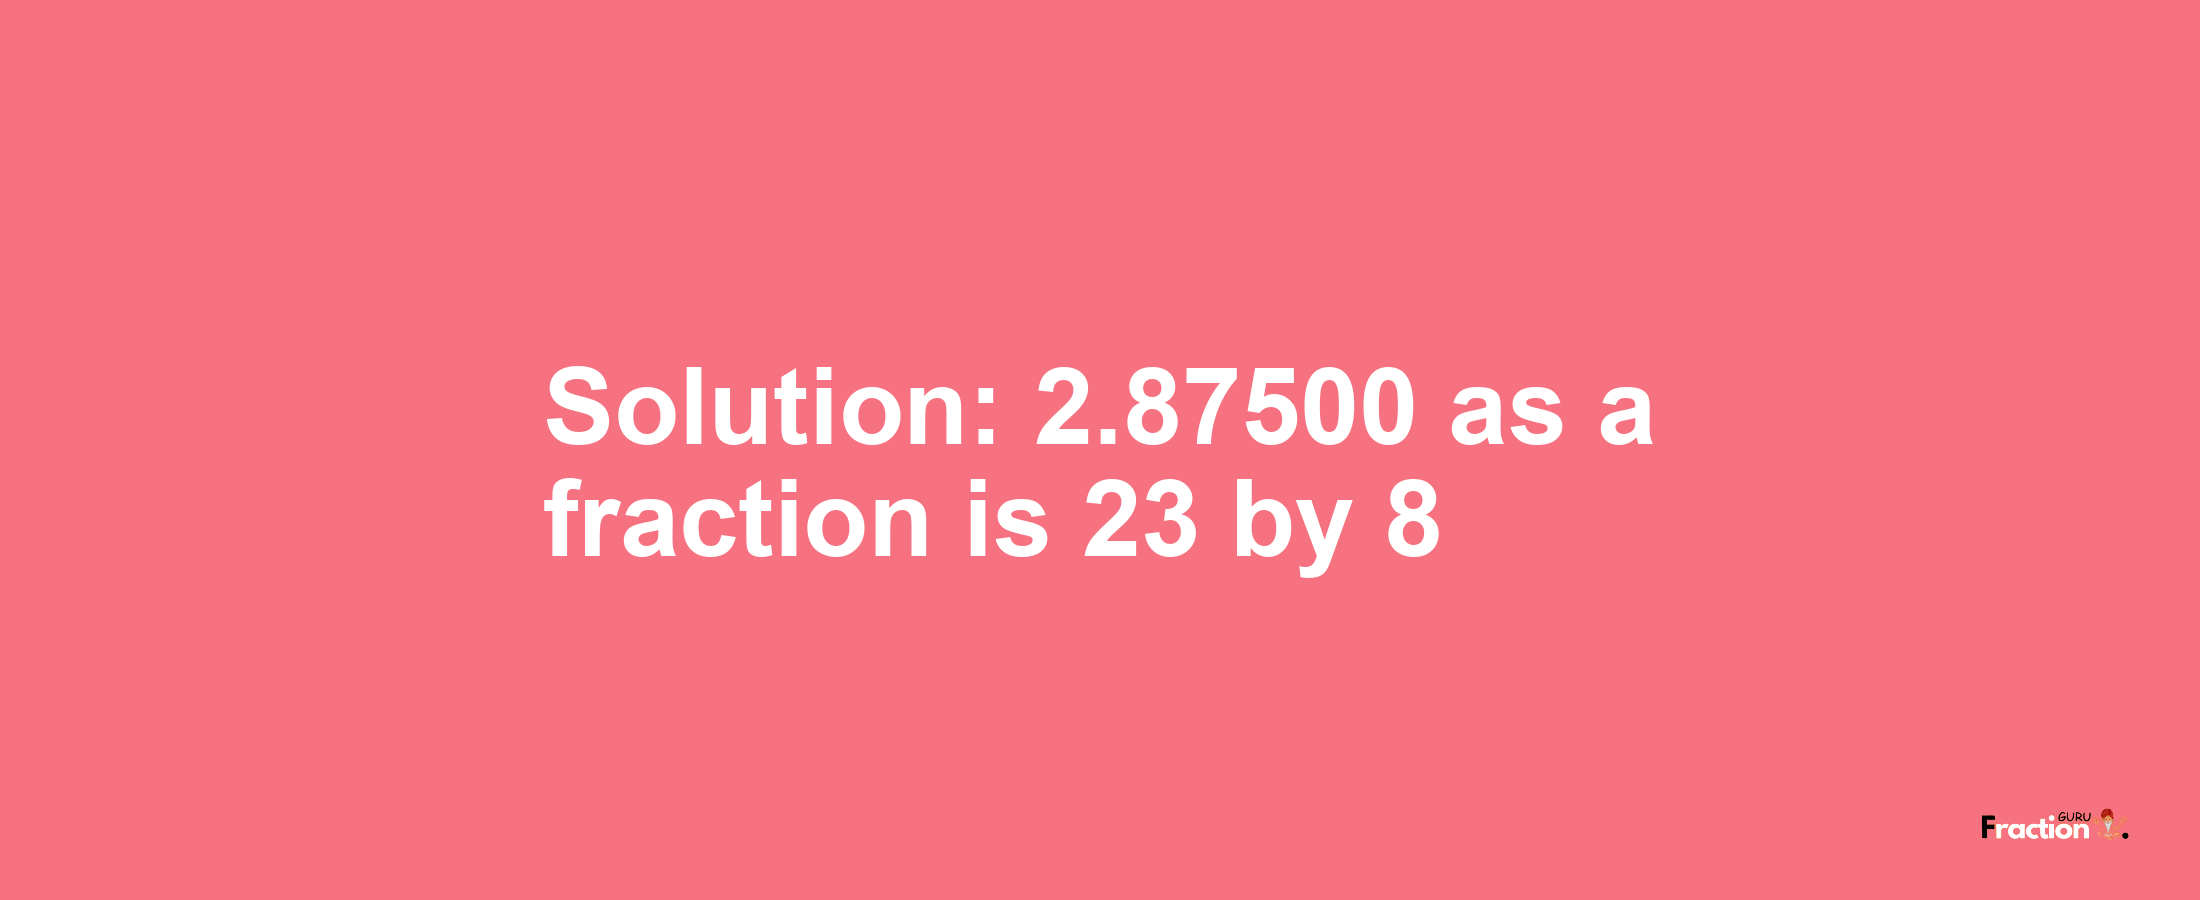 Solution:2.87500 as a fraction is 23/8